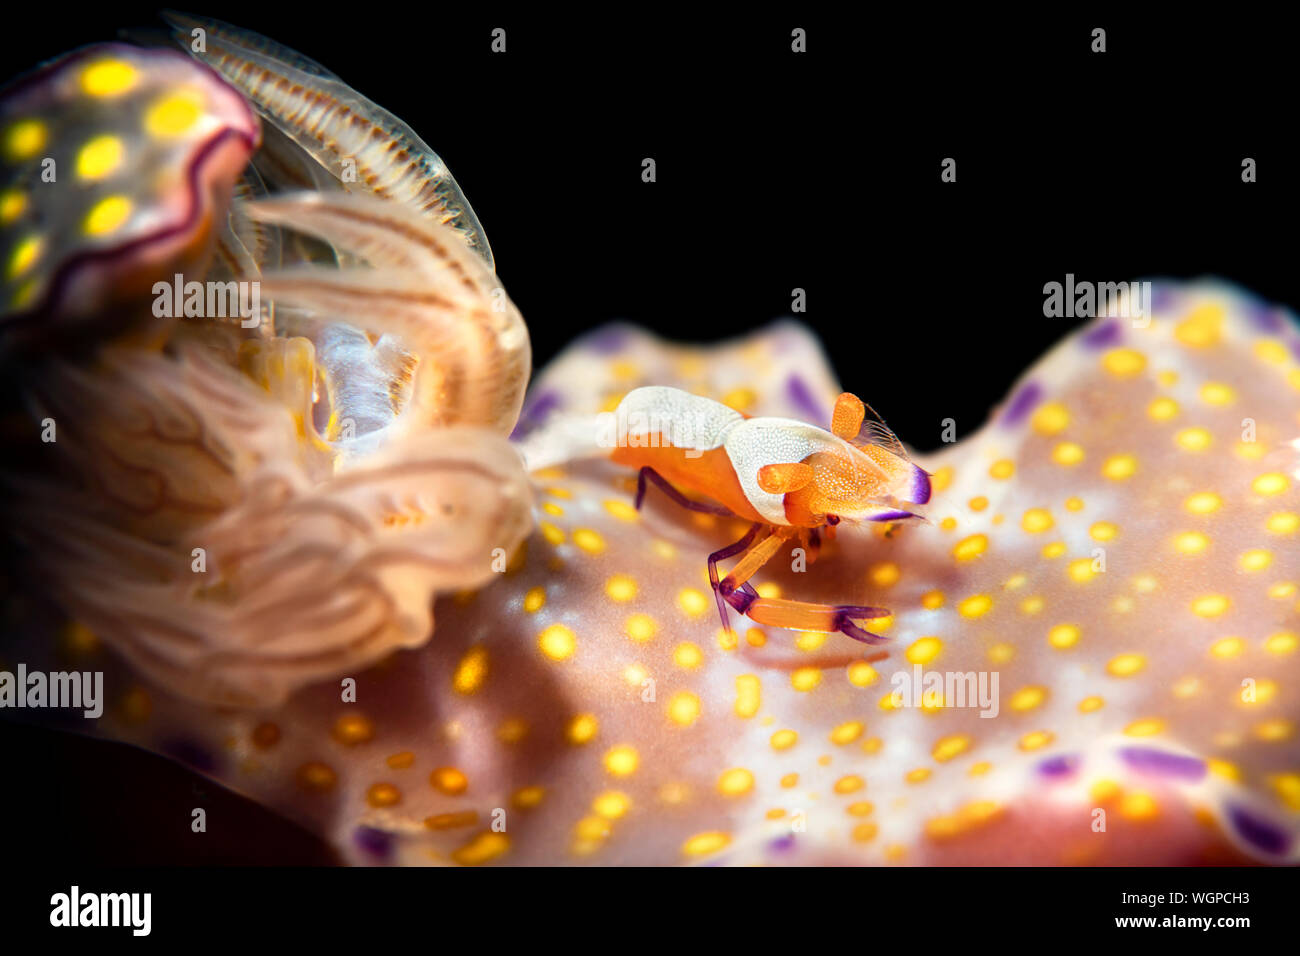 A colorful emperor shrimp often found on nudibranchs uses the snail for transportation and to have a means to find food. Stock Photo